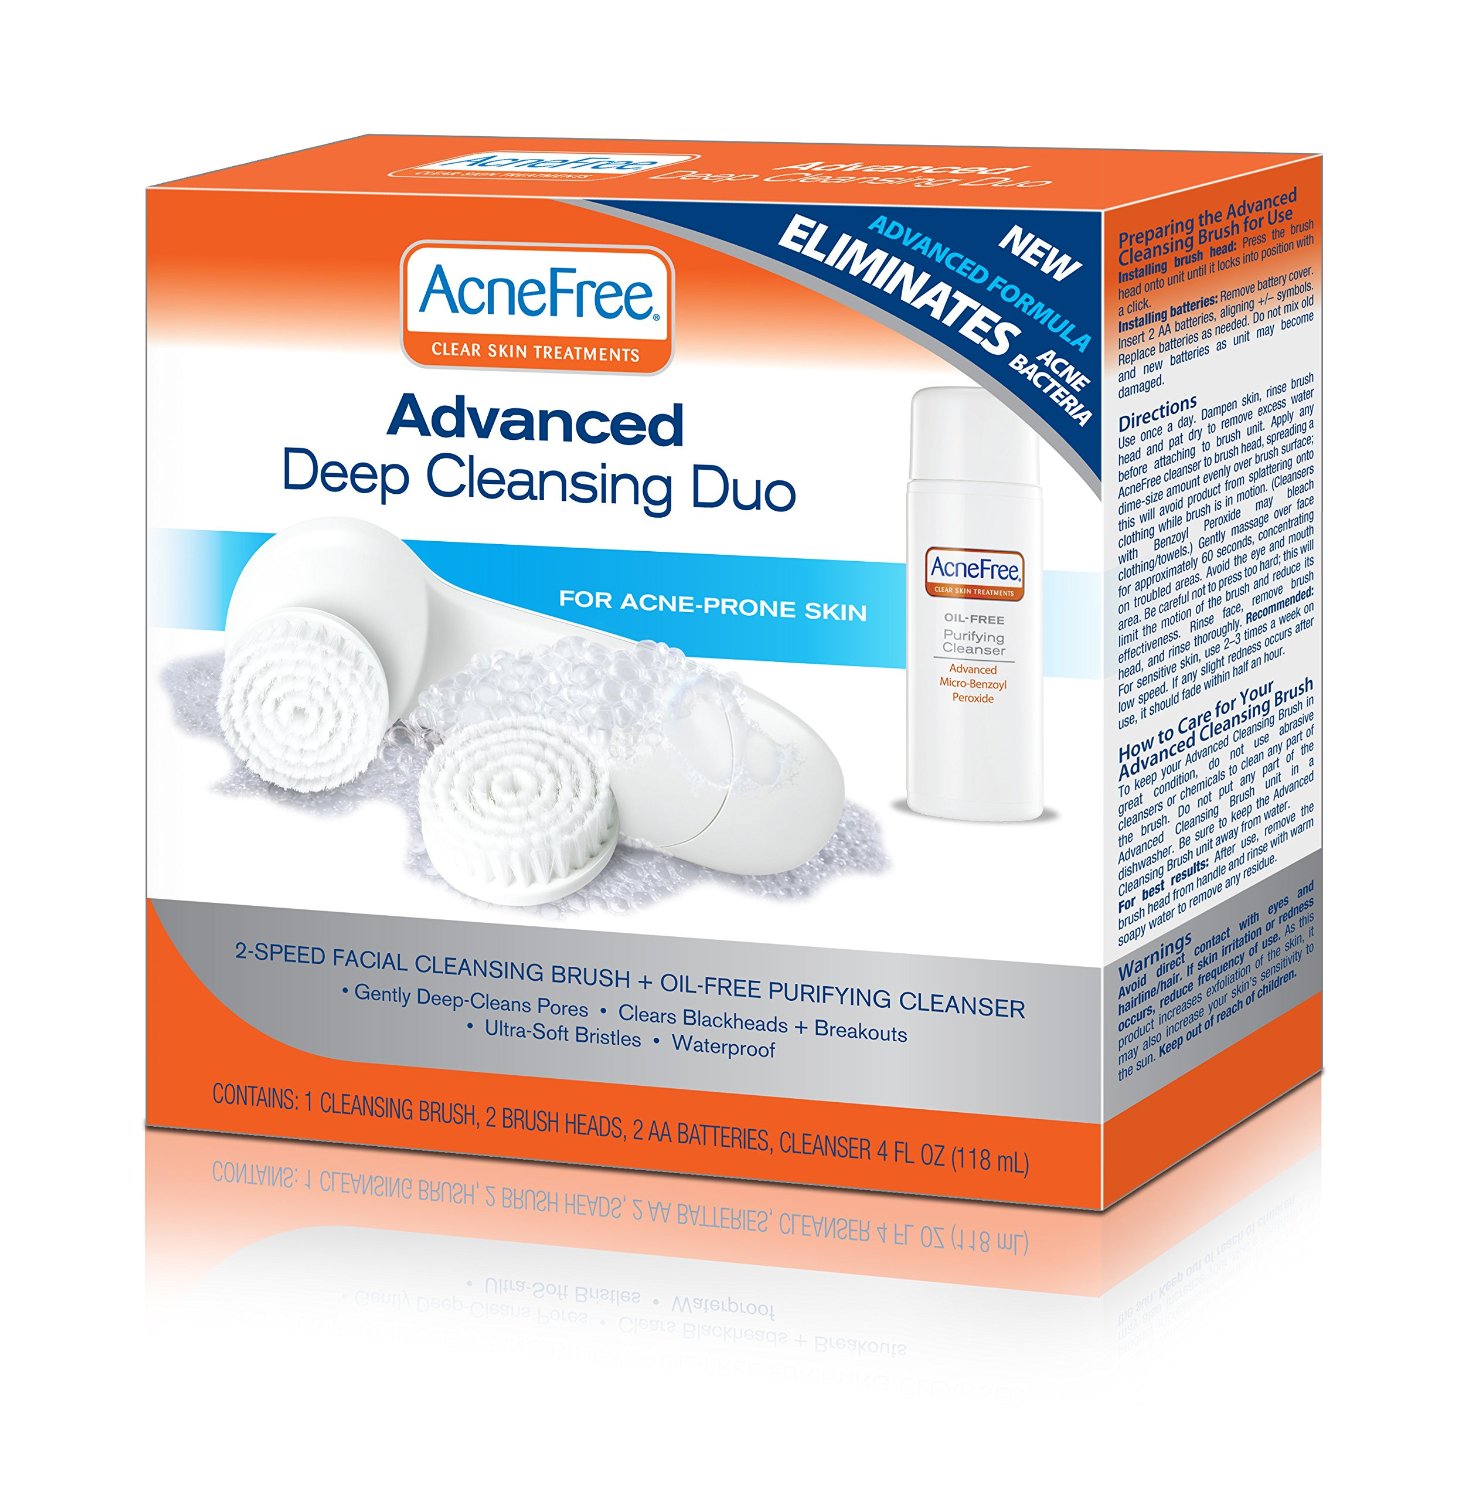 AcneFree advanced cleansing duo